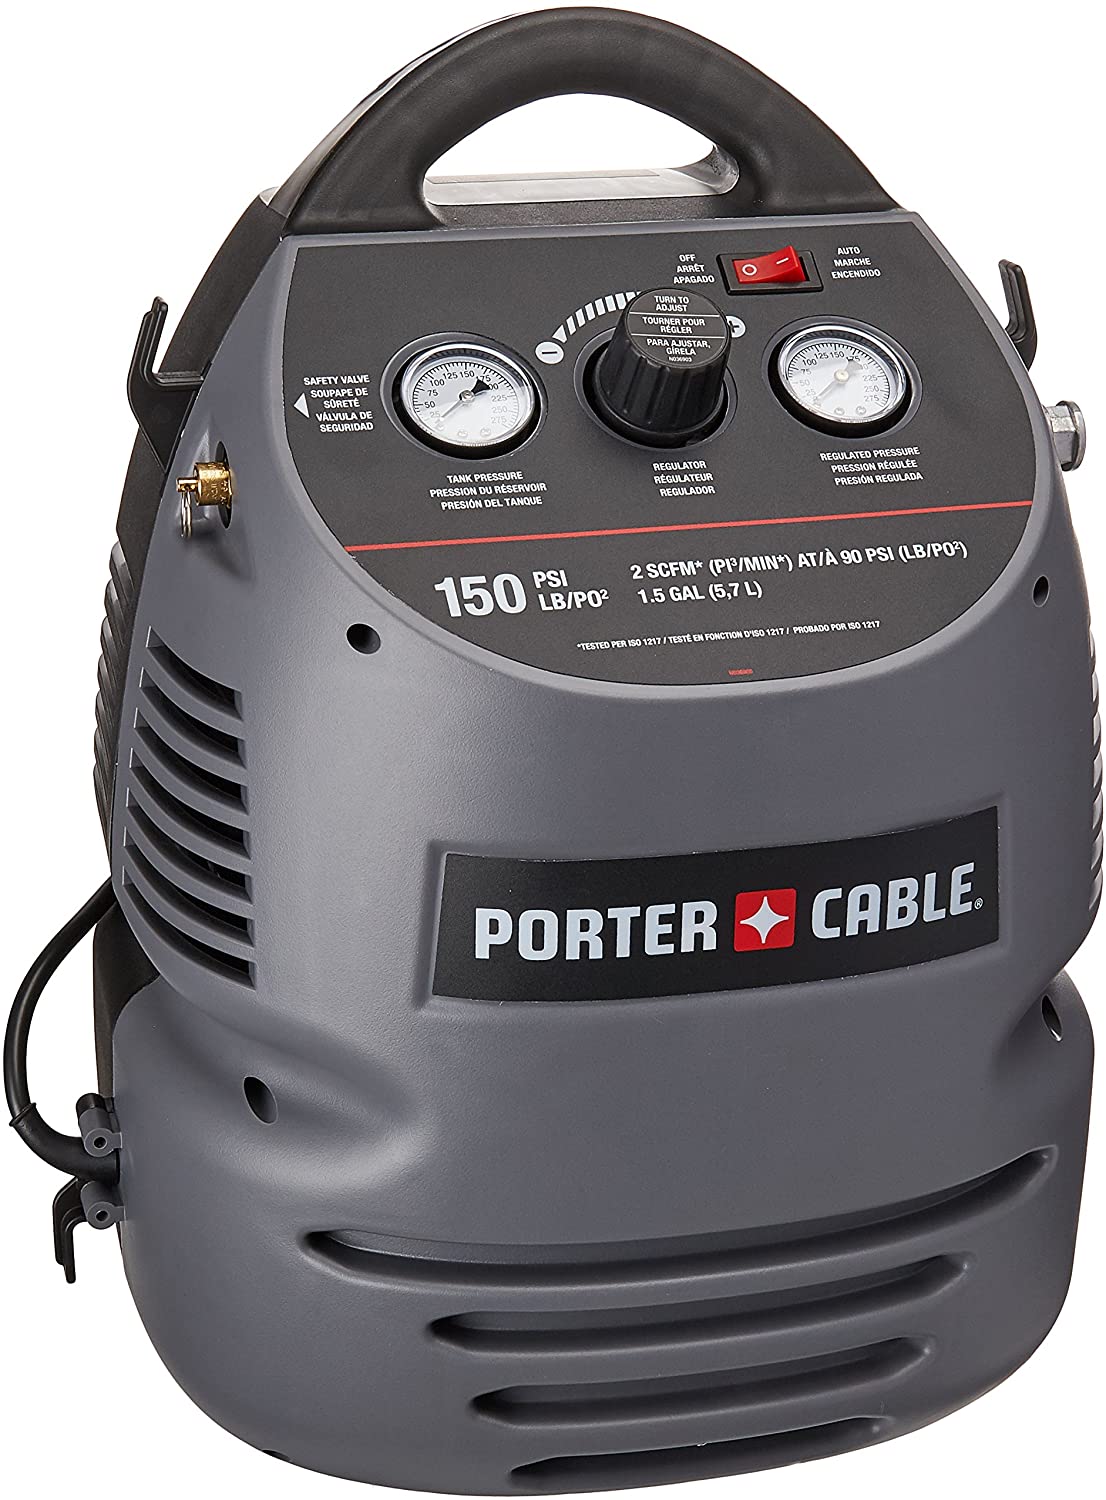 Porter-cable Cmb15 (1.5 Gallon) Oil-free Fully Shrouded / Hand Carry Compressor Kit With 25' Hose